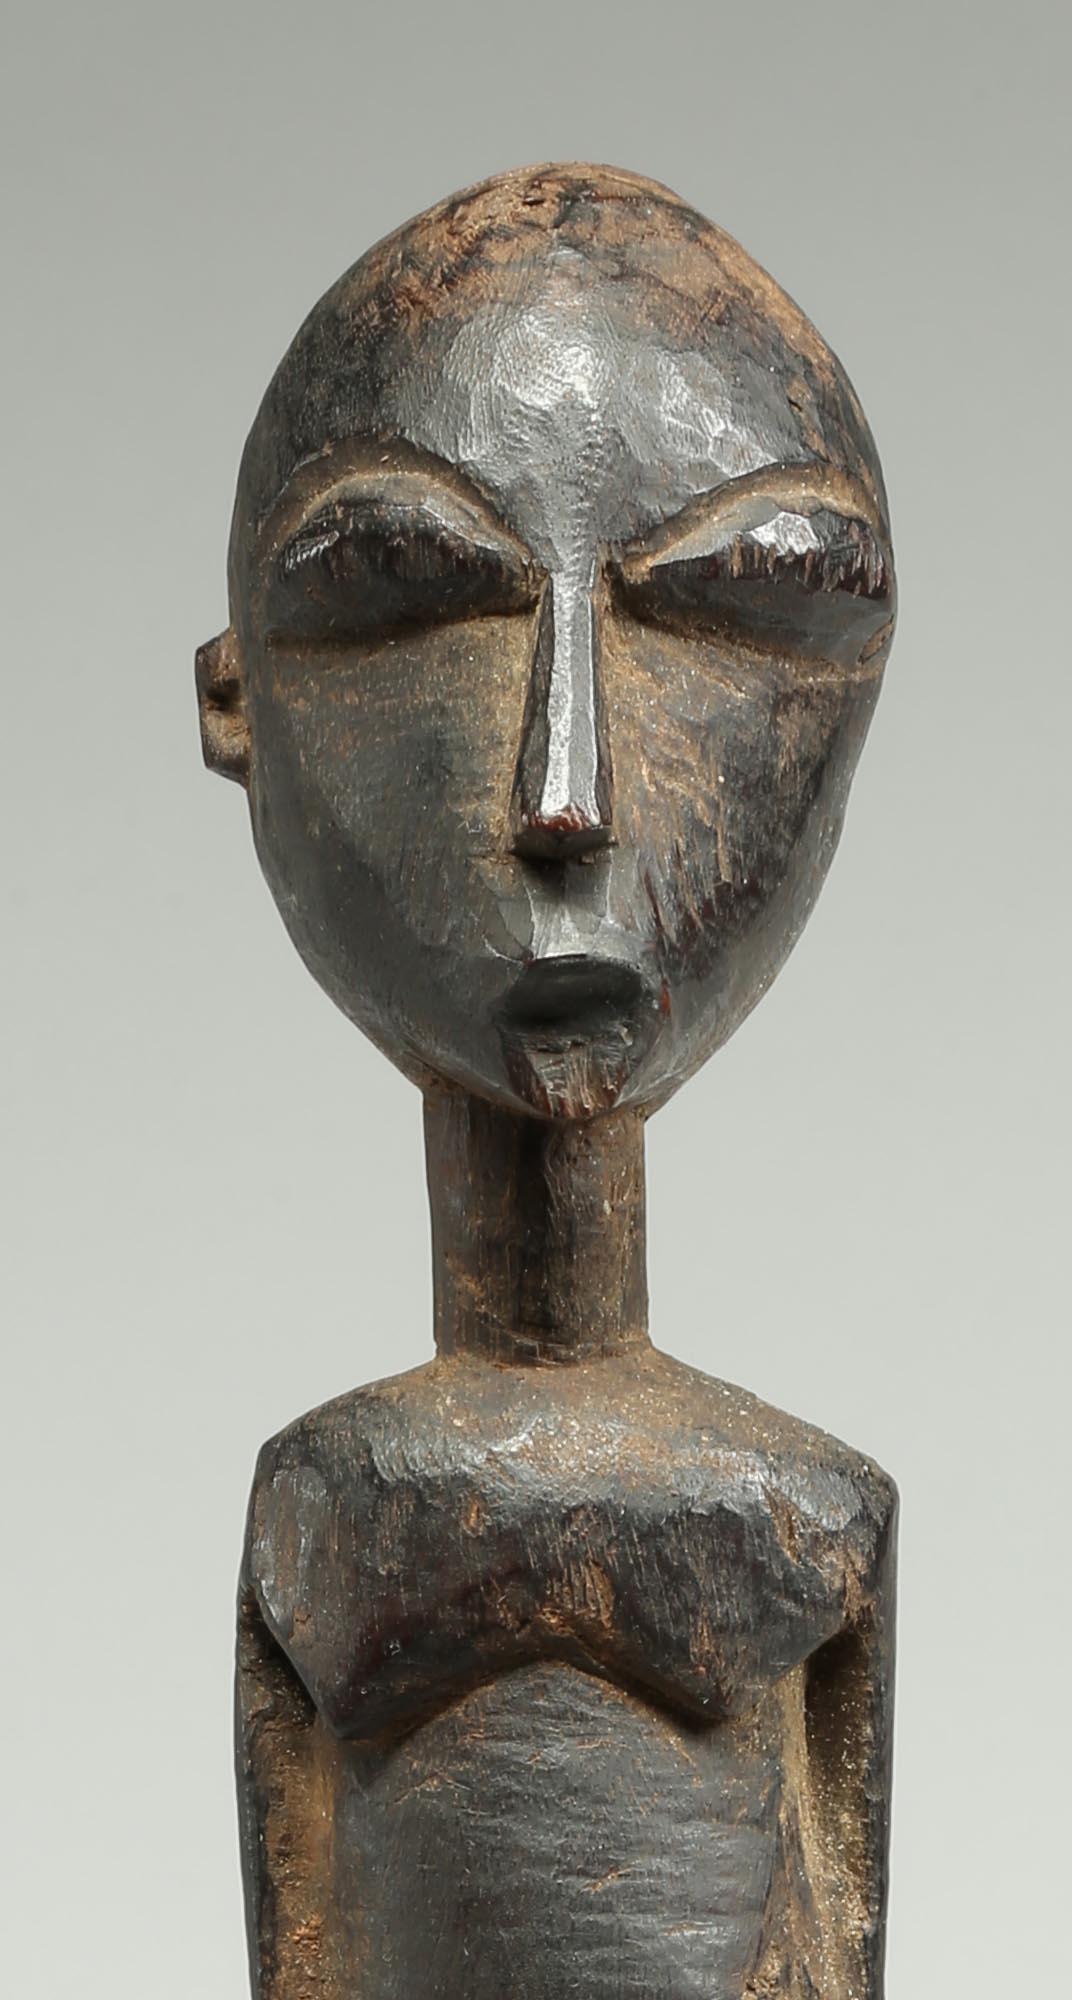 Tall Elegant Standing Lobi Figure with Expressive Face, Early 20th Century Ghana 4